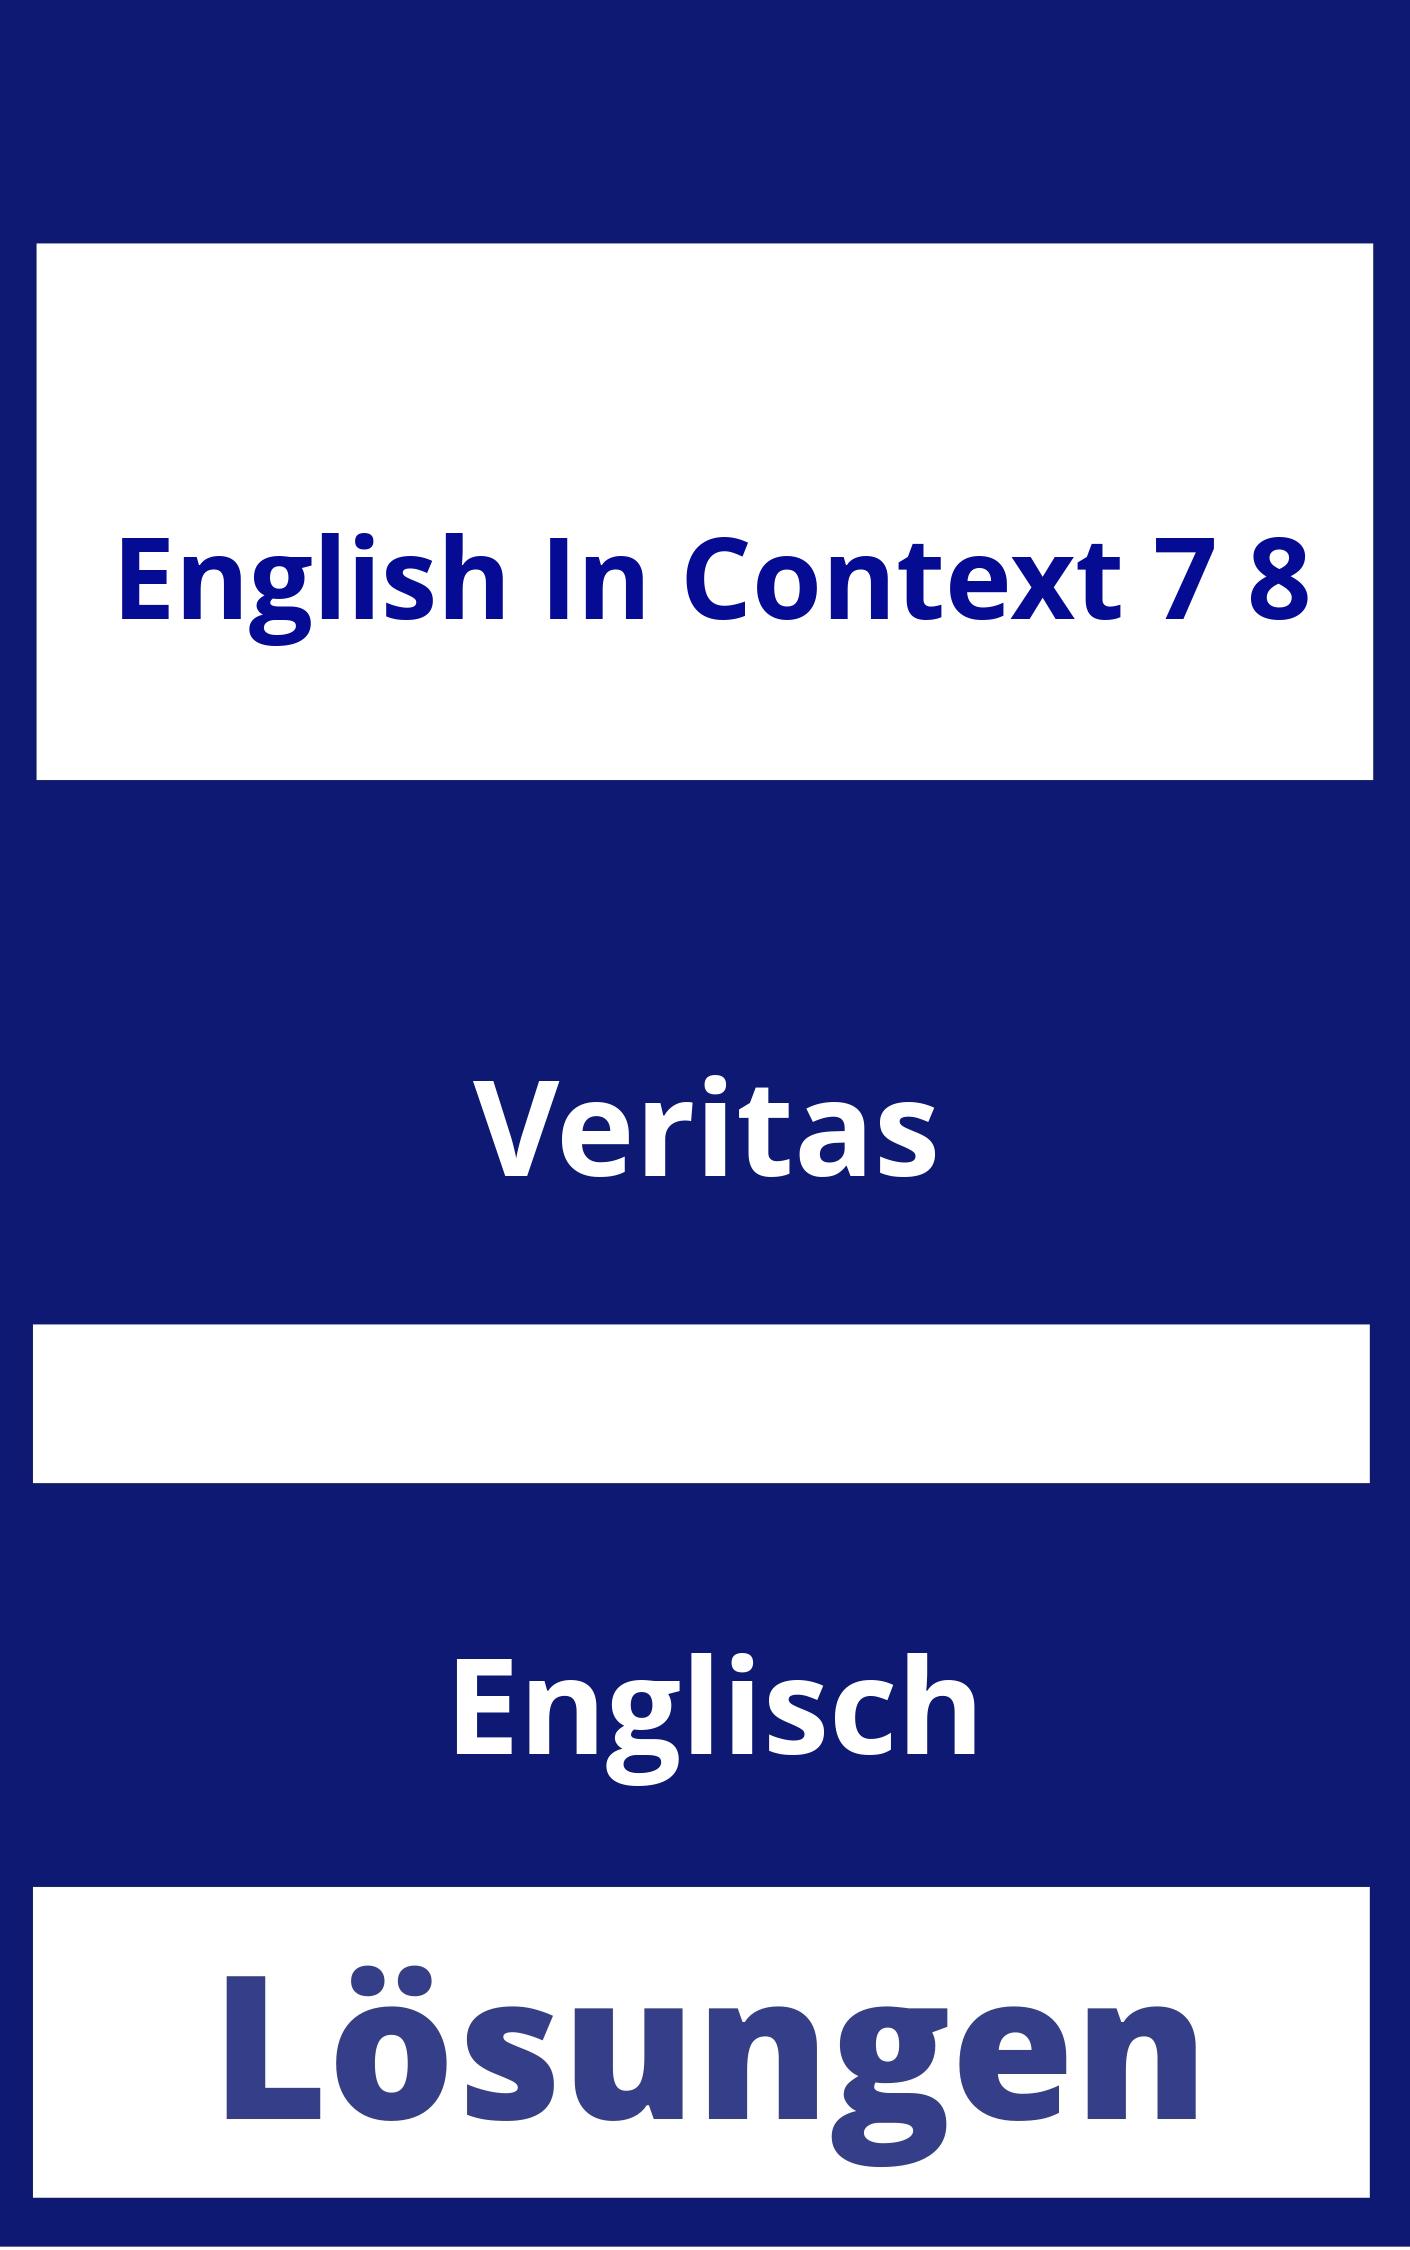 English in Context 7/8